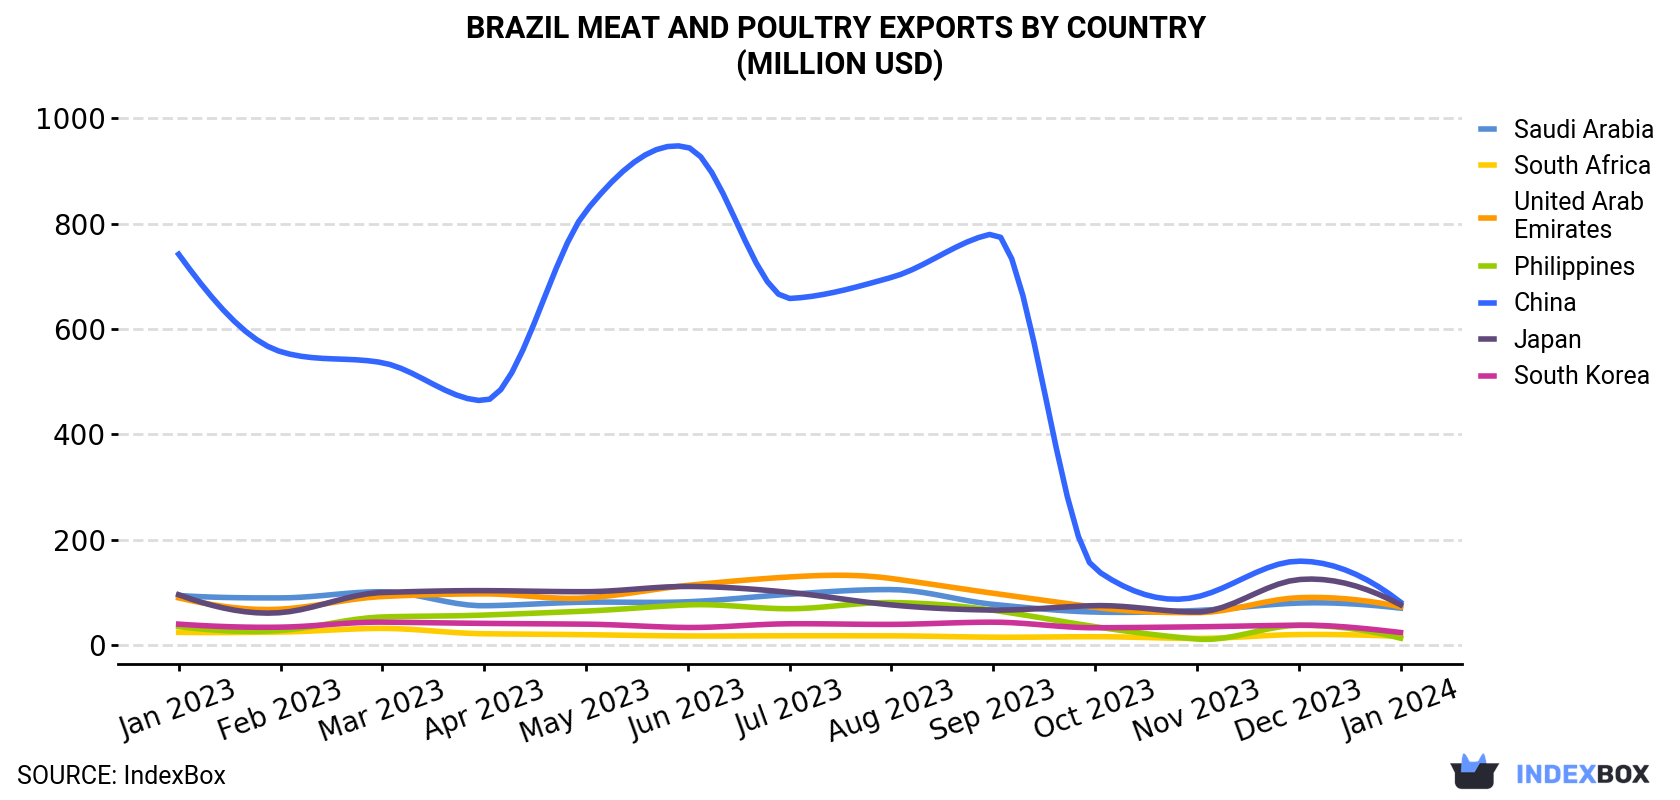 Brazil Meat And Poultry Exports By Country (Million USD)